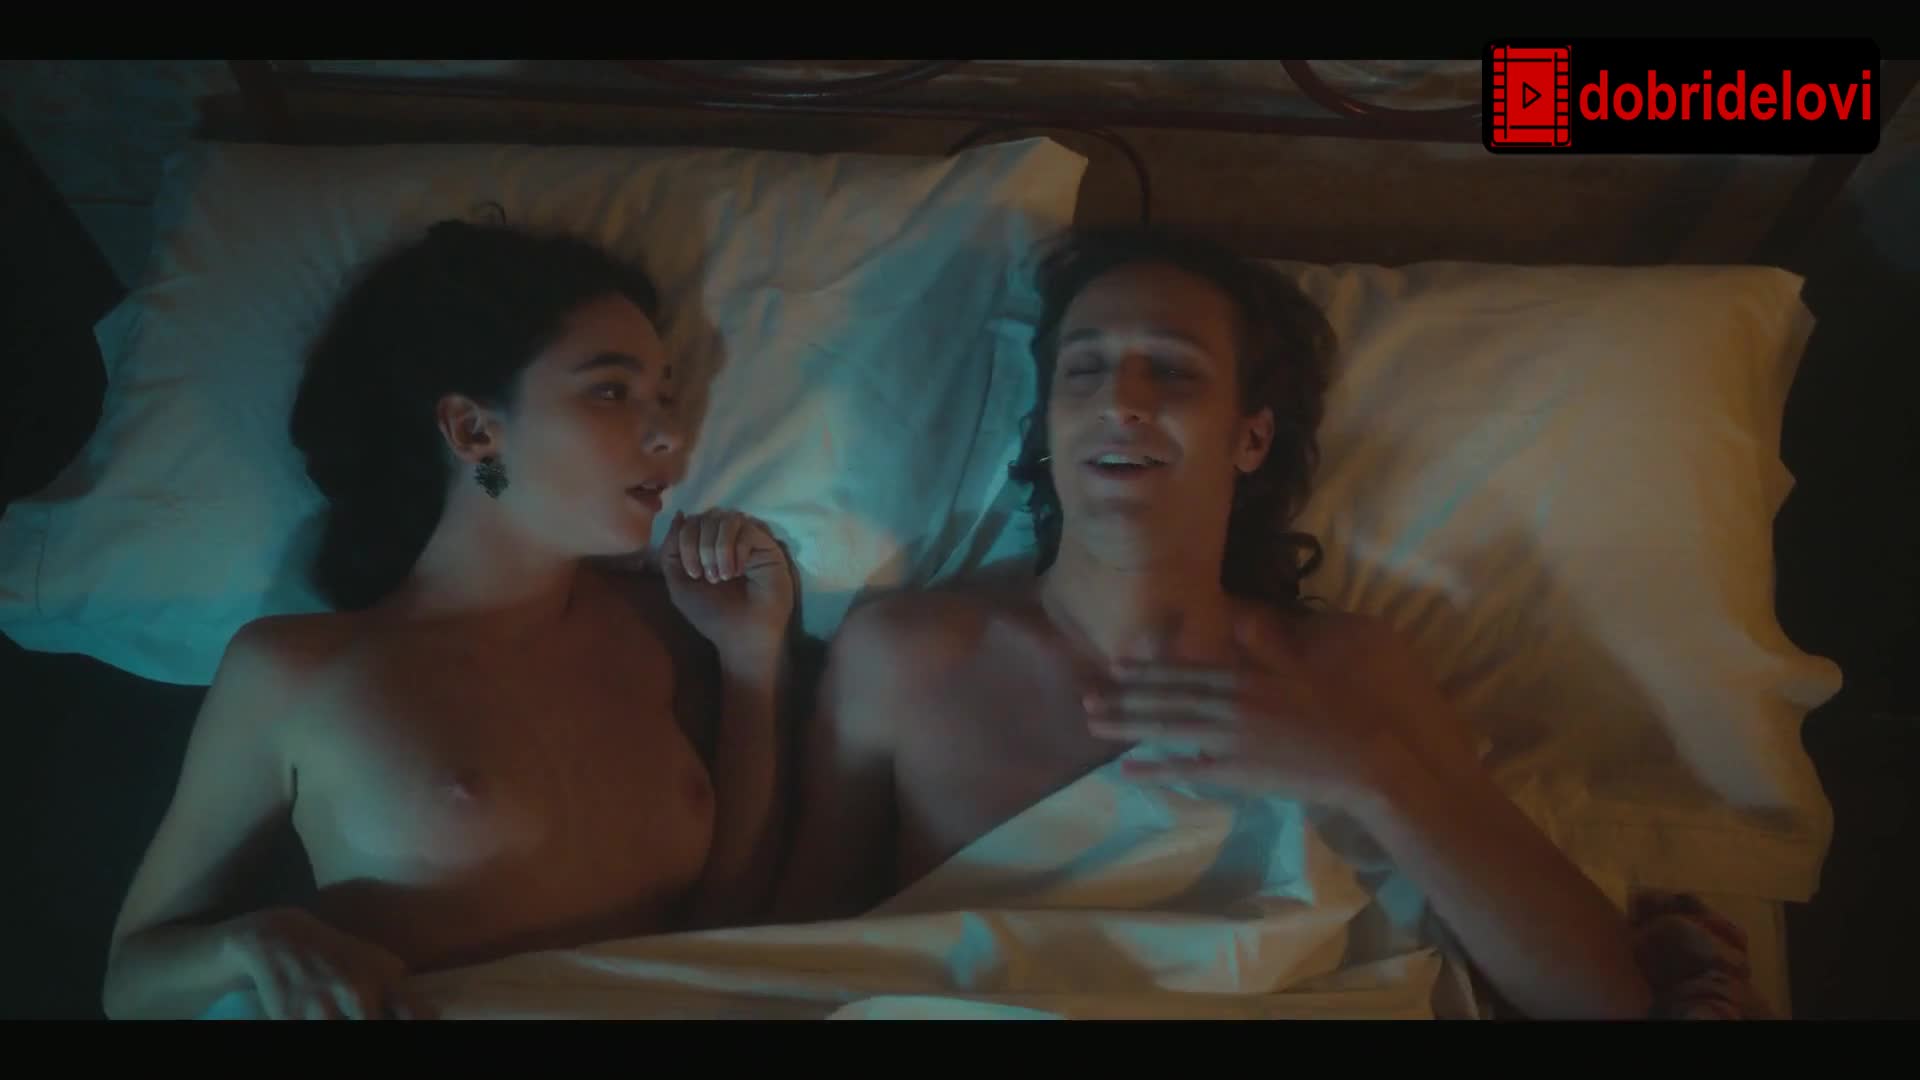 Matilda De Angelis nude in bed scene from The Law According to Lidia Poët